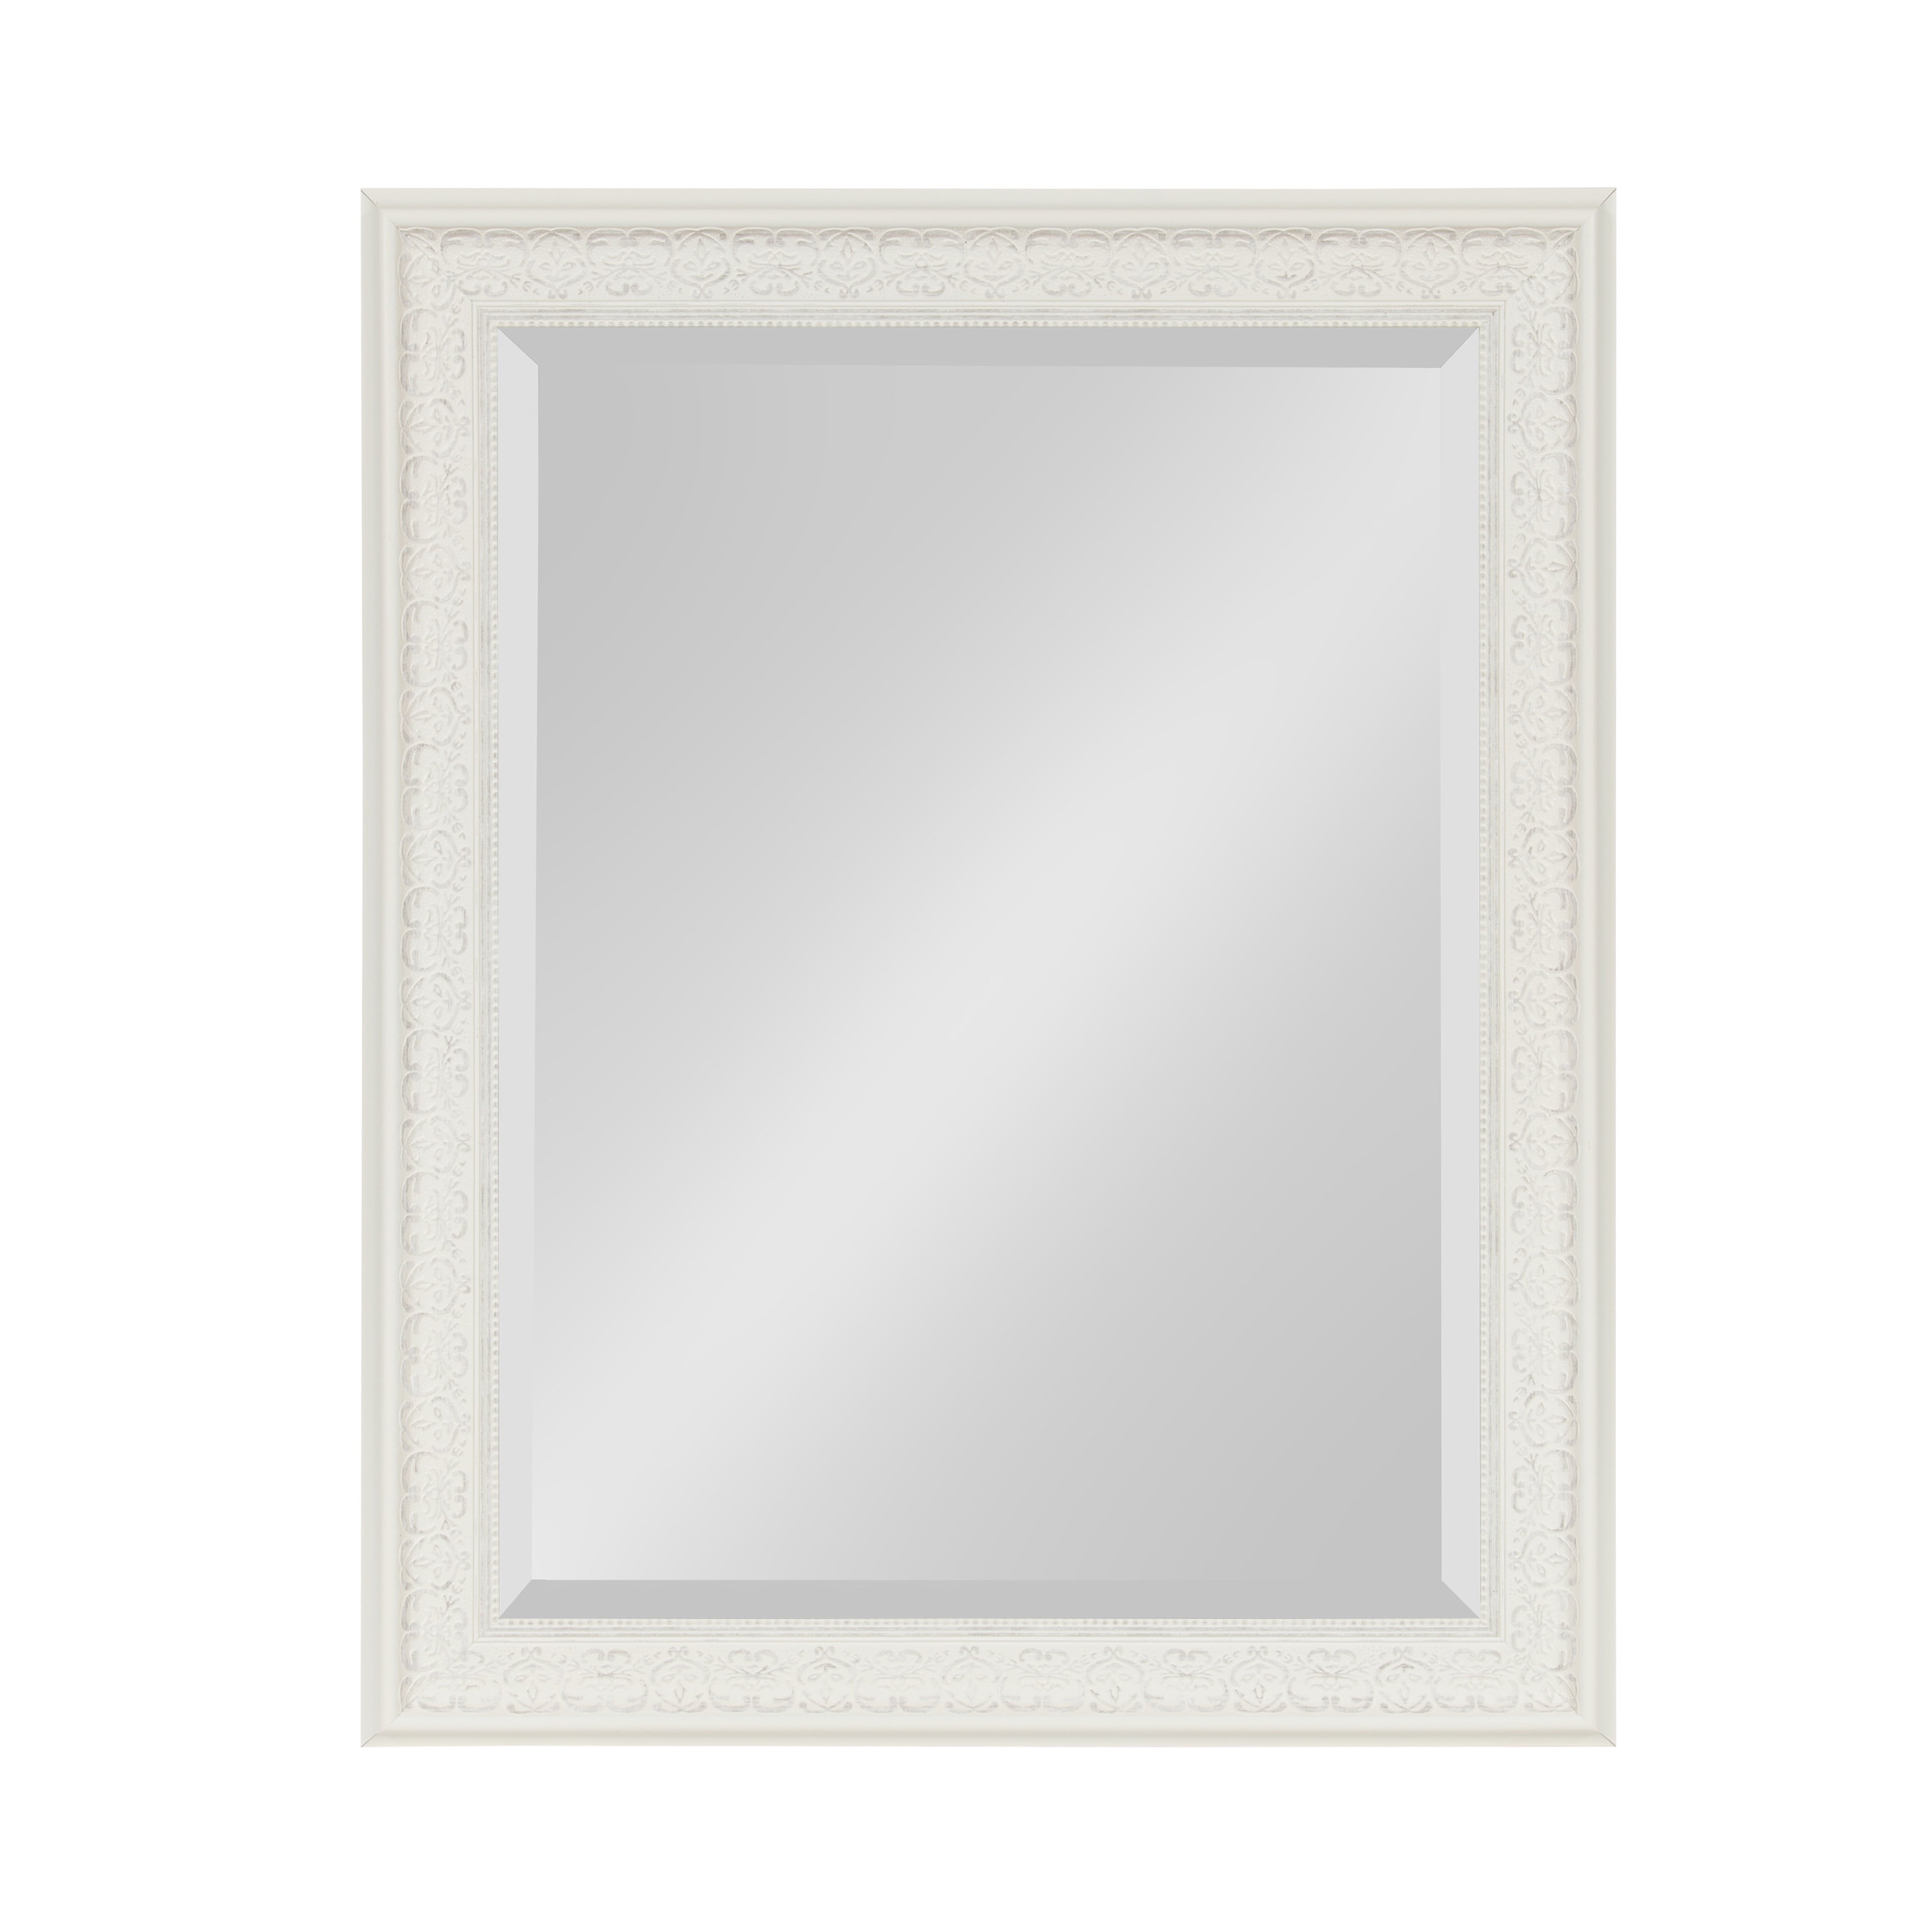 Large Framed Rectangle Wall Mirror, Large White Rectangle Wall Mirror